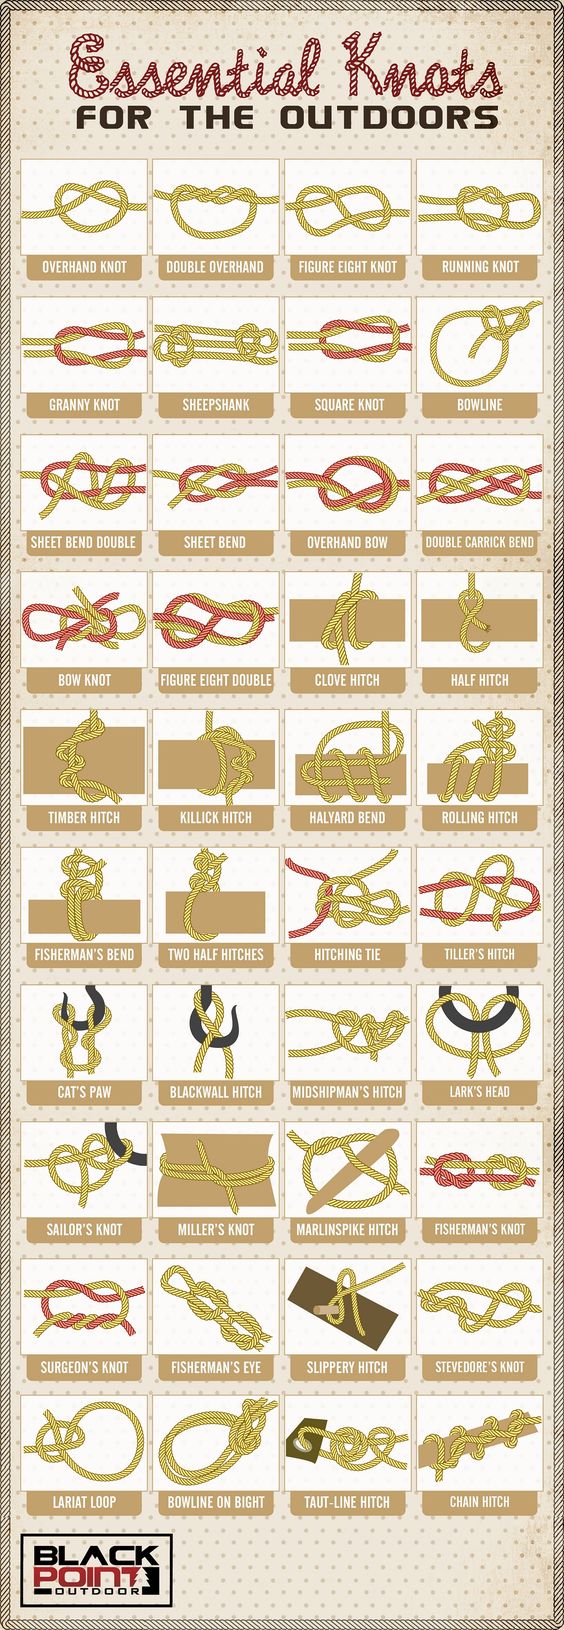 Essential Knots, Knot Tying, Knots of the outdoors-SR